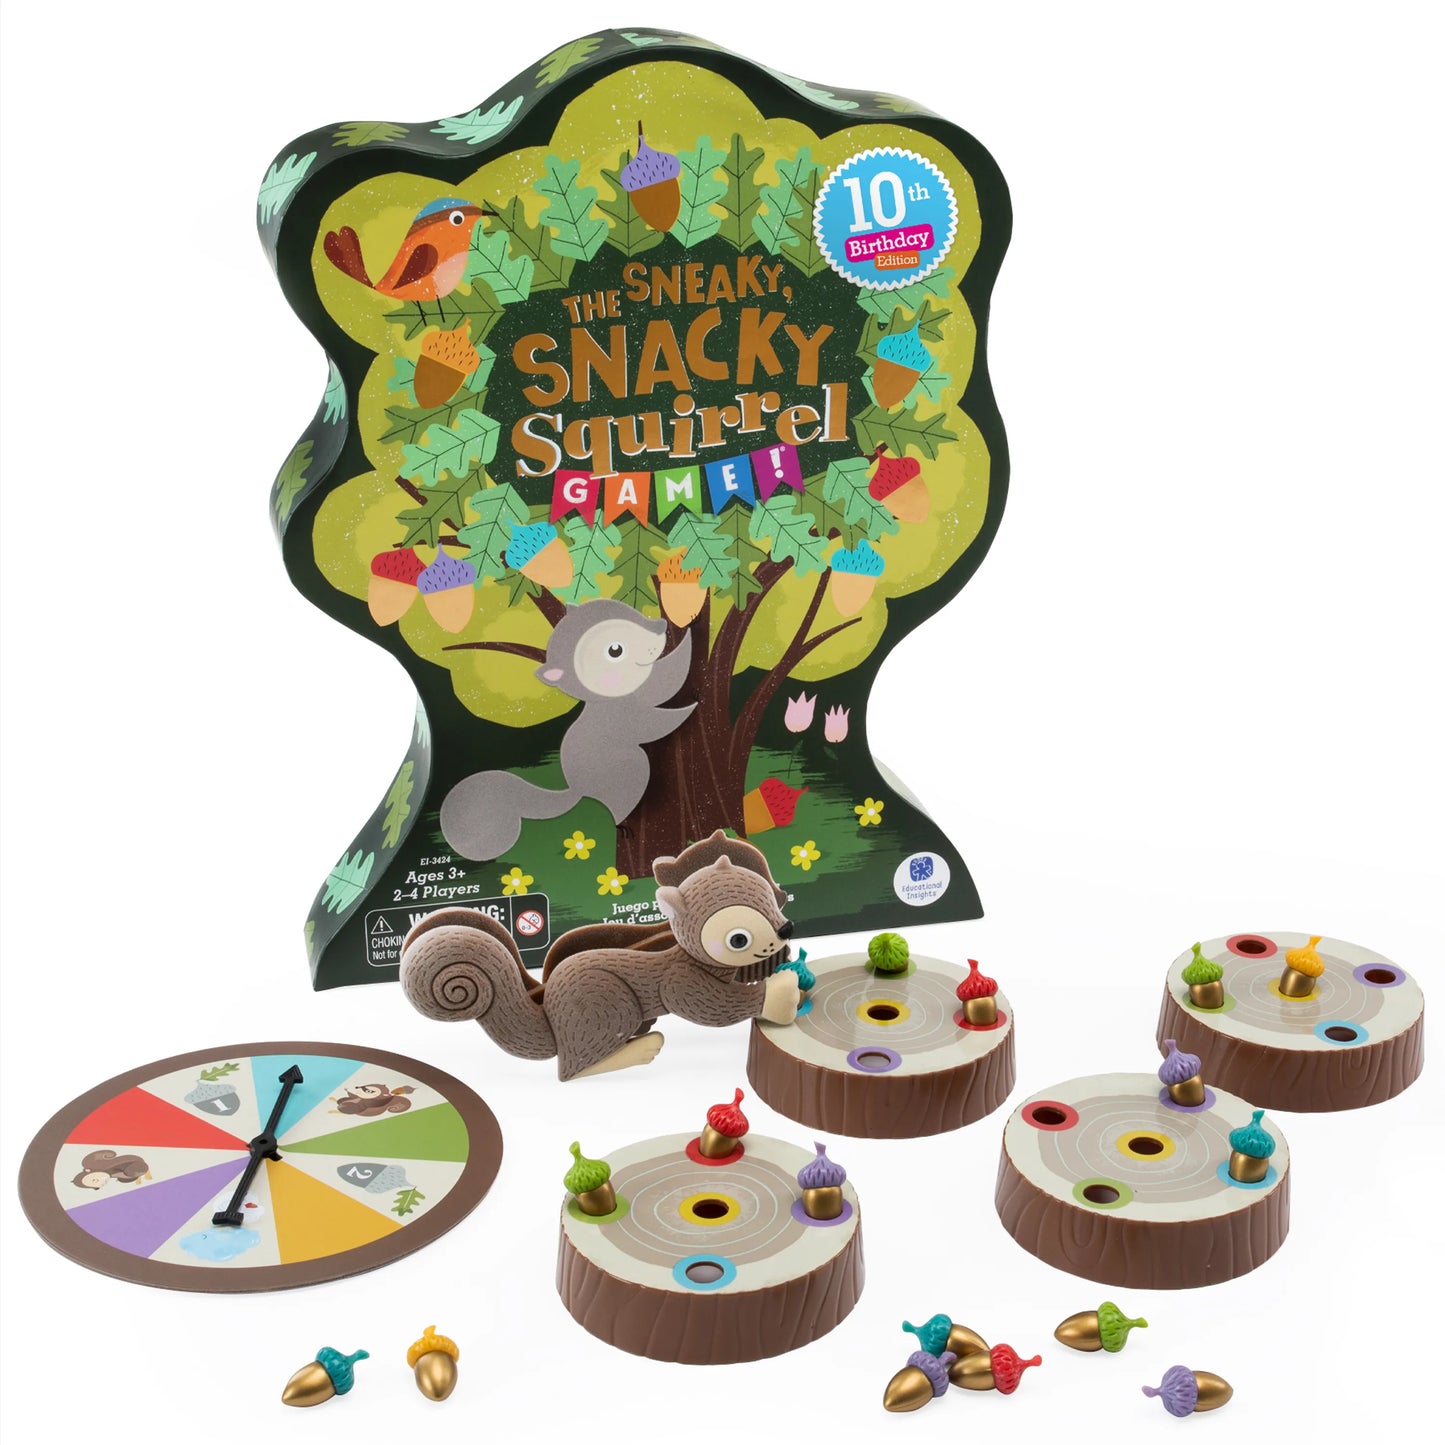 Educational Insights The Sneaky Snacky Squirrel Game! Special Edition